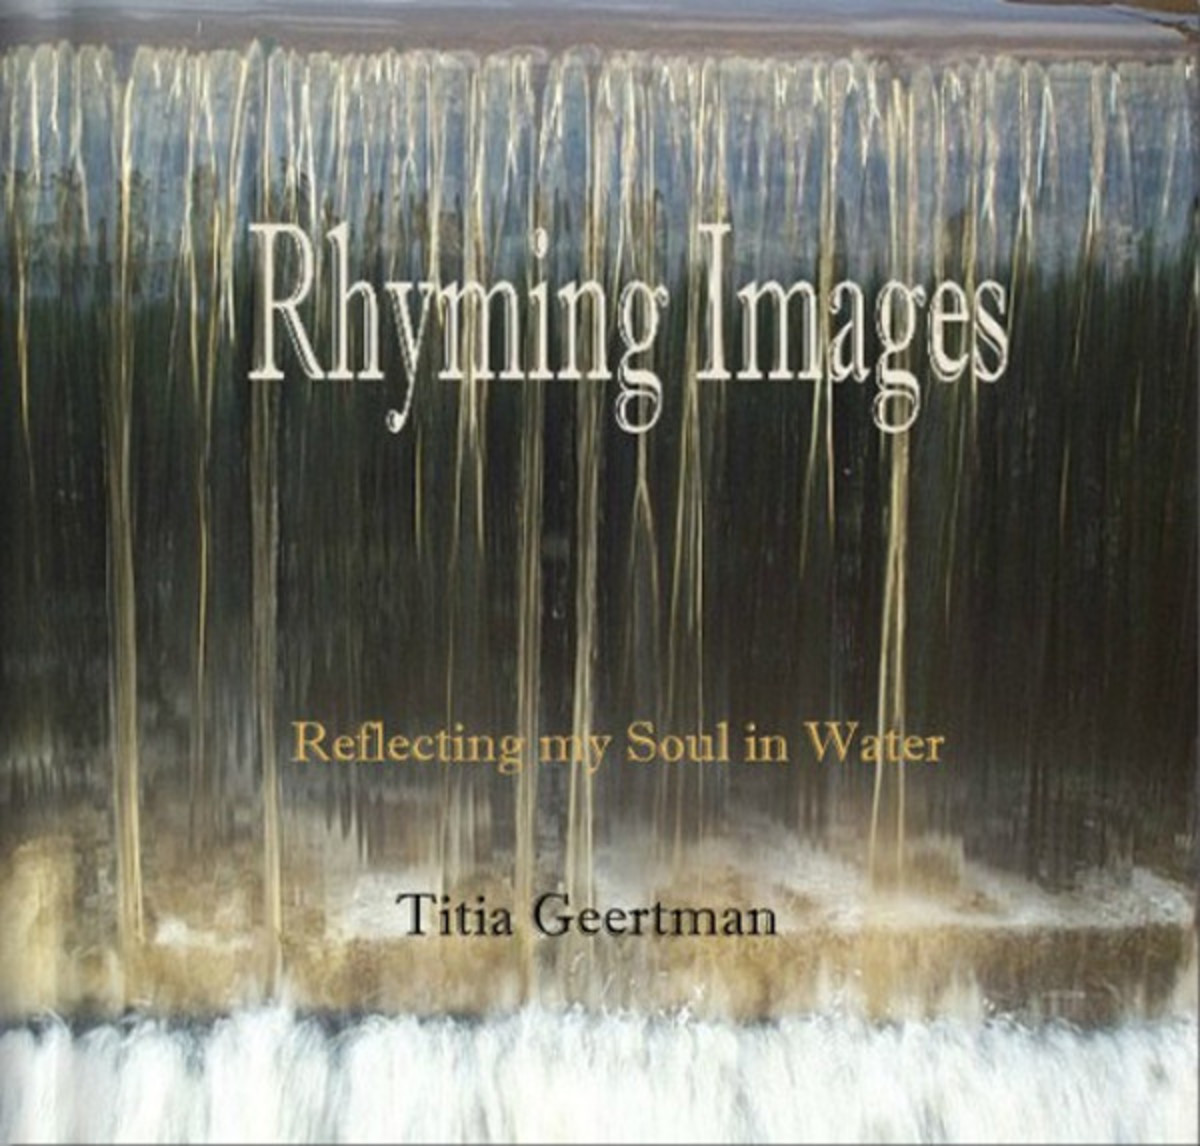 How to Combine Photography and Poetry - Rhyming Images | HubPages